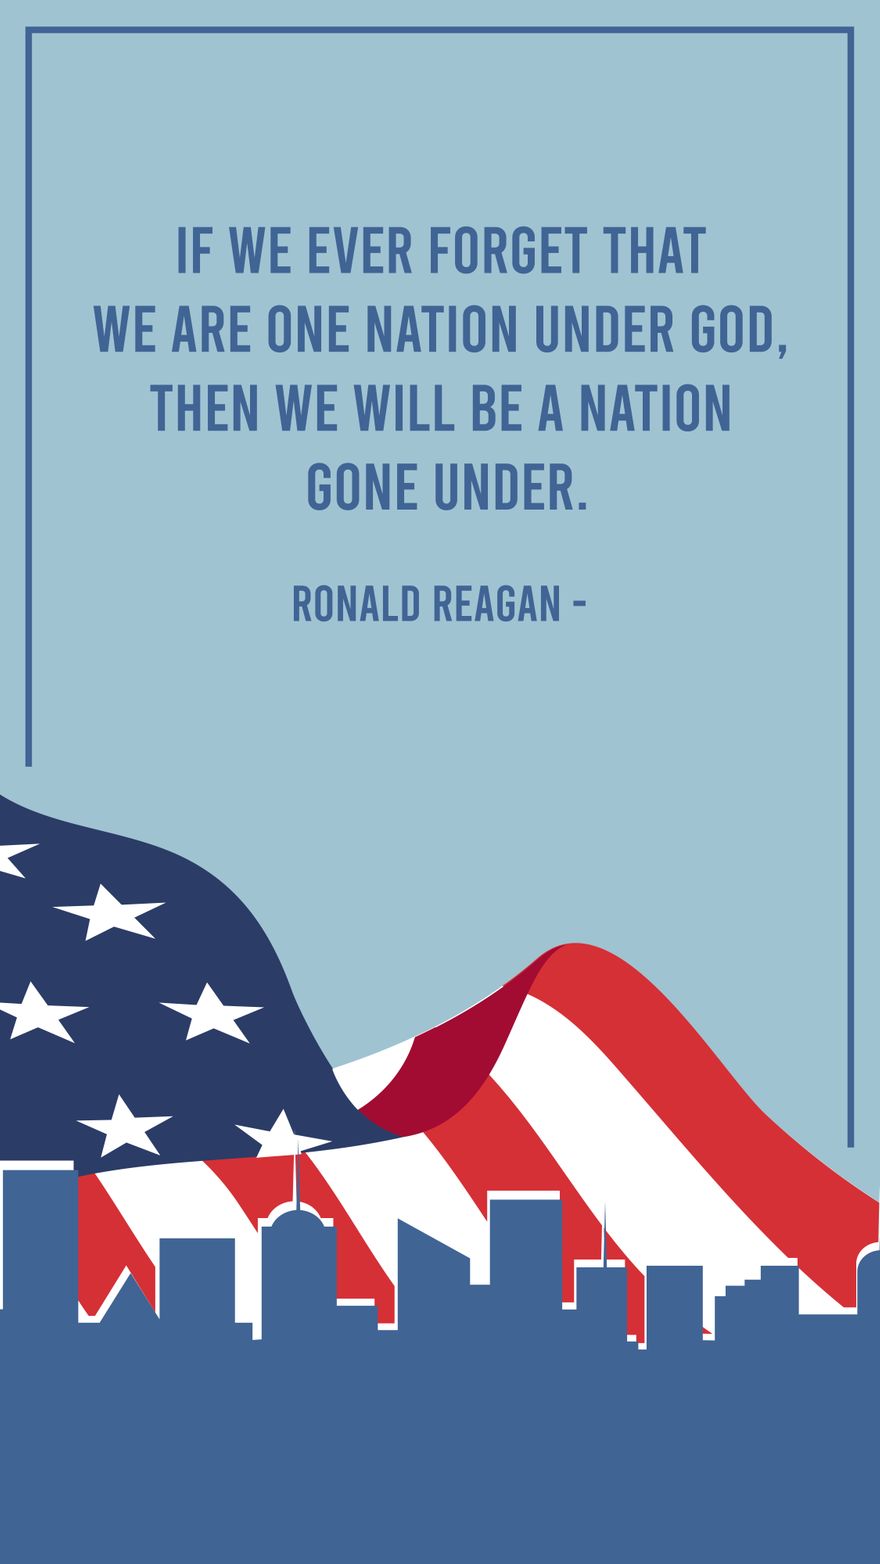 Free Ronald Reagan - If we ever forget that we are One Nation Under God, then we will be a nation gone under.